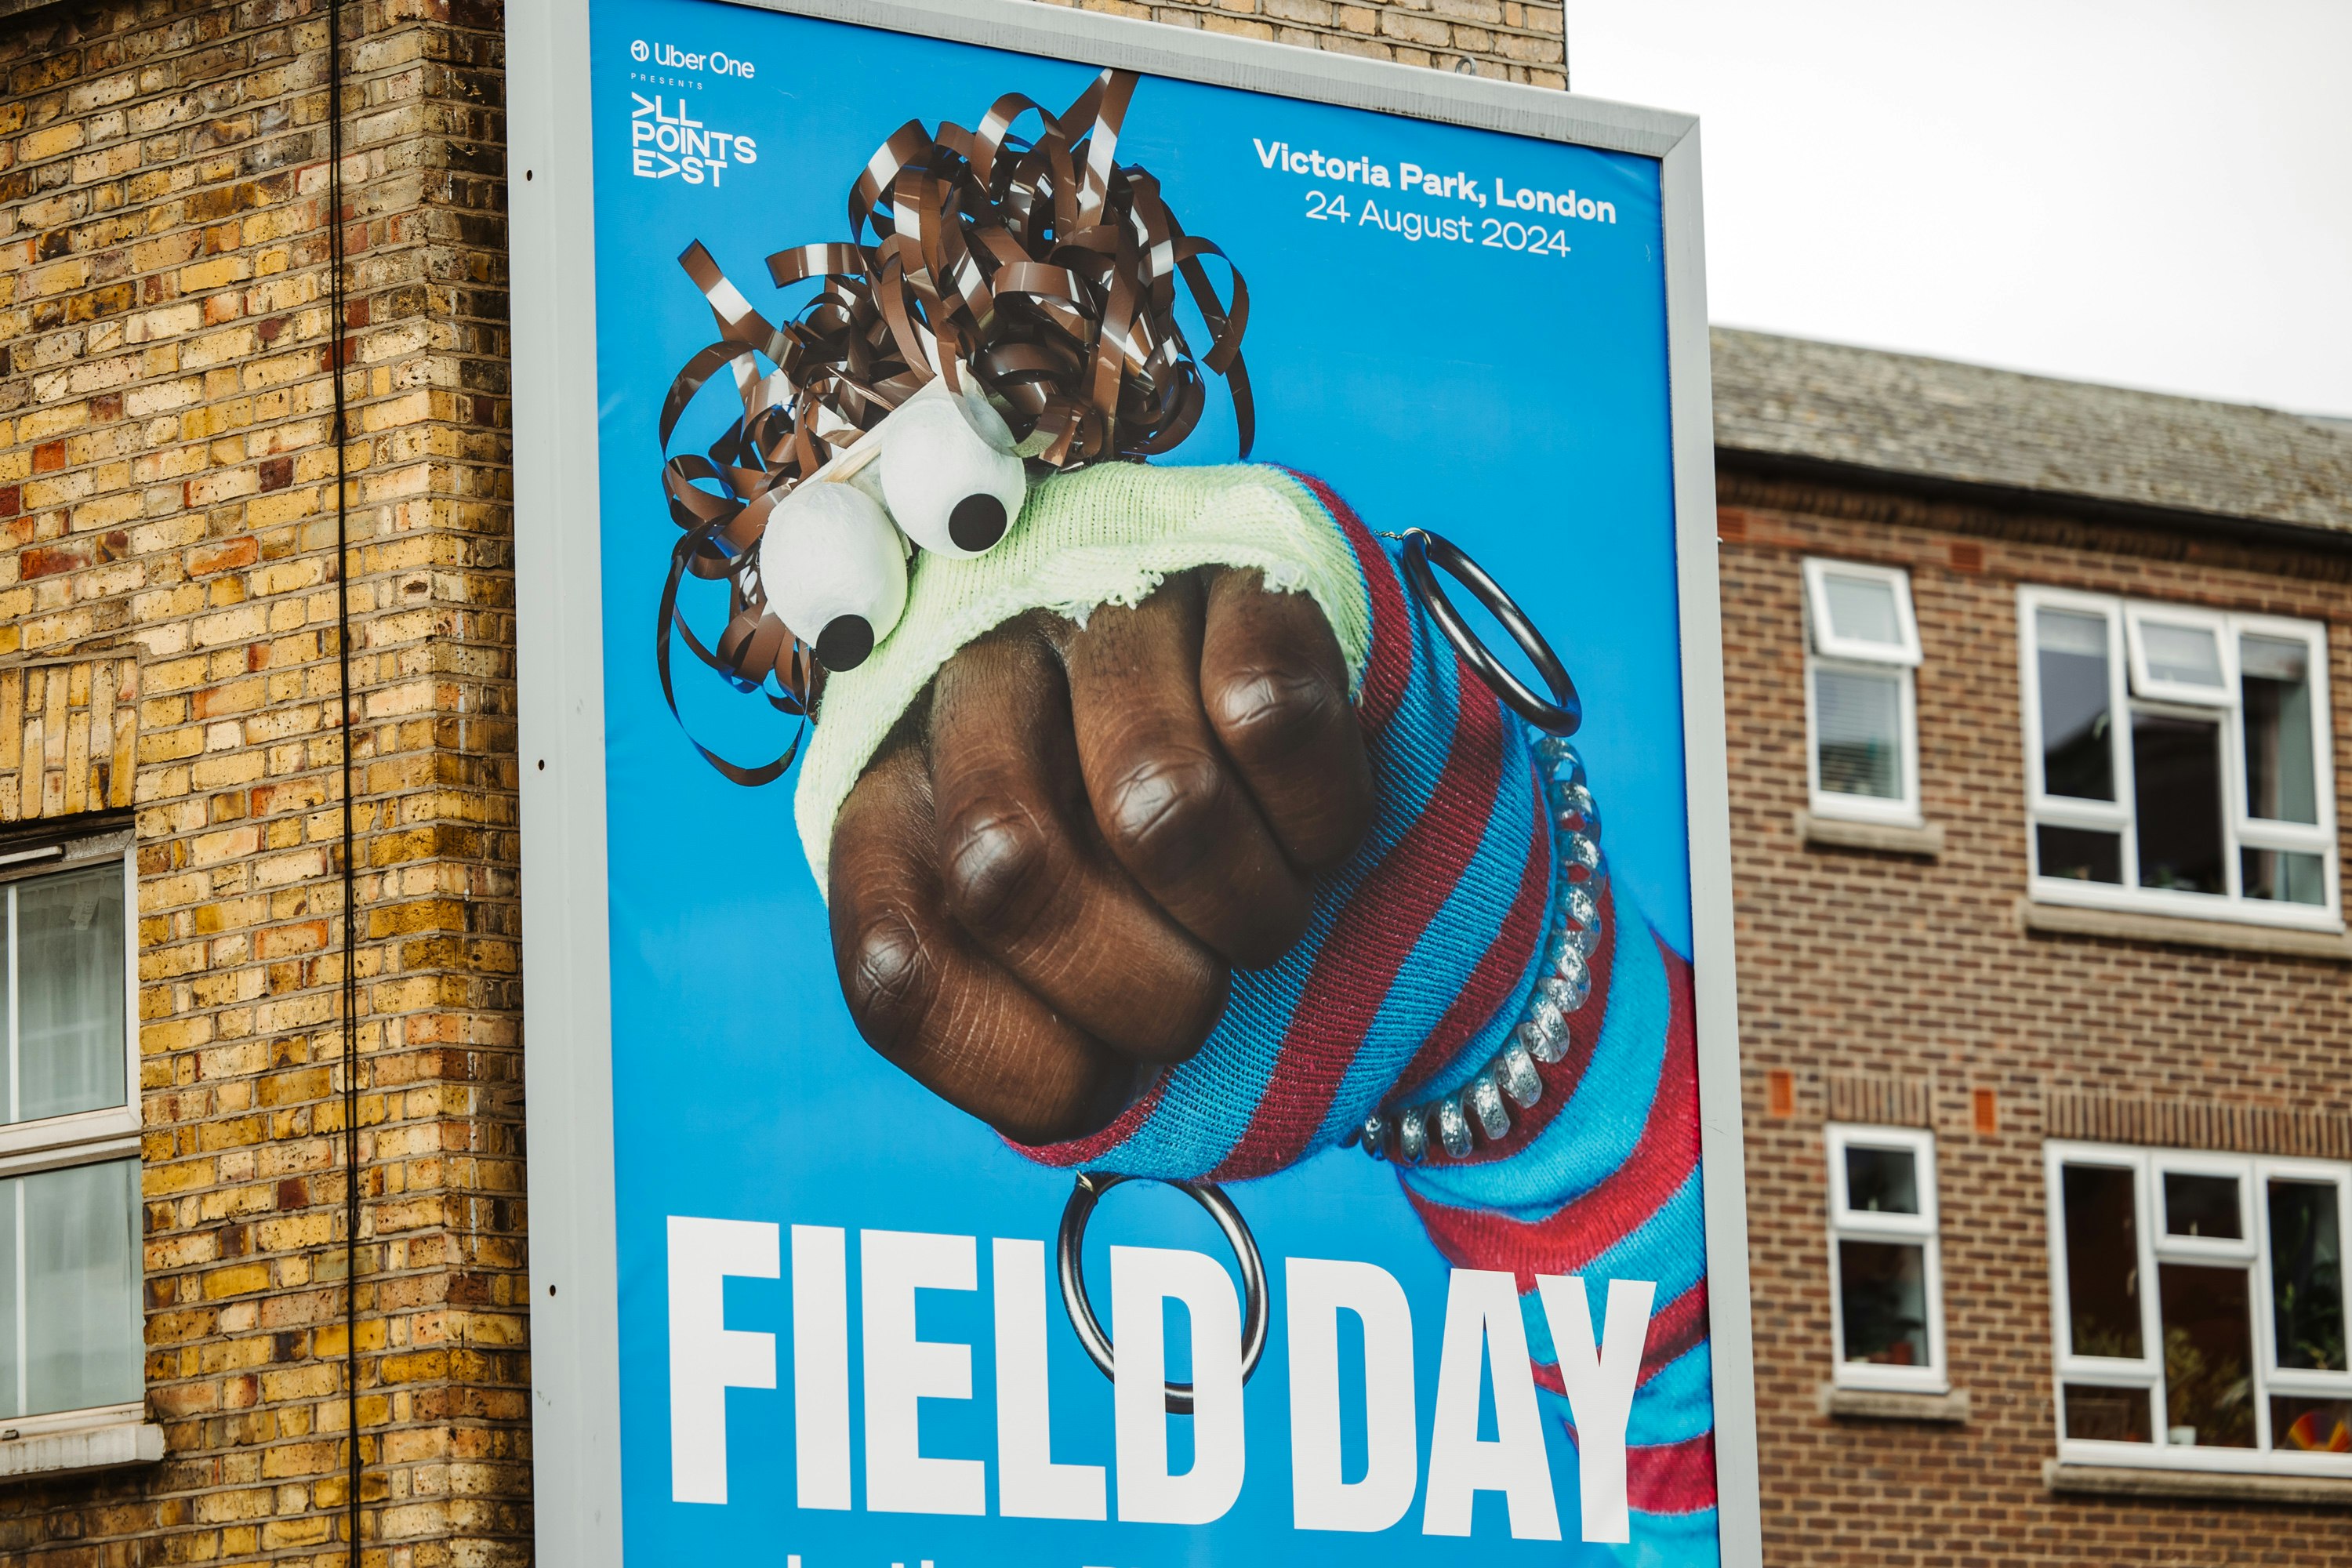 A large billboard advertising Field Day, featuring a stripy puppet on a blue background.